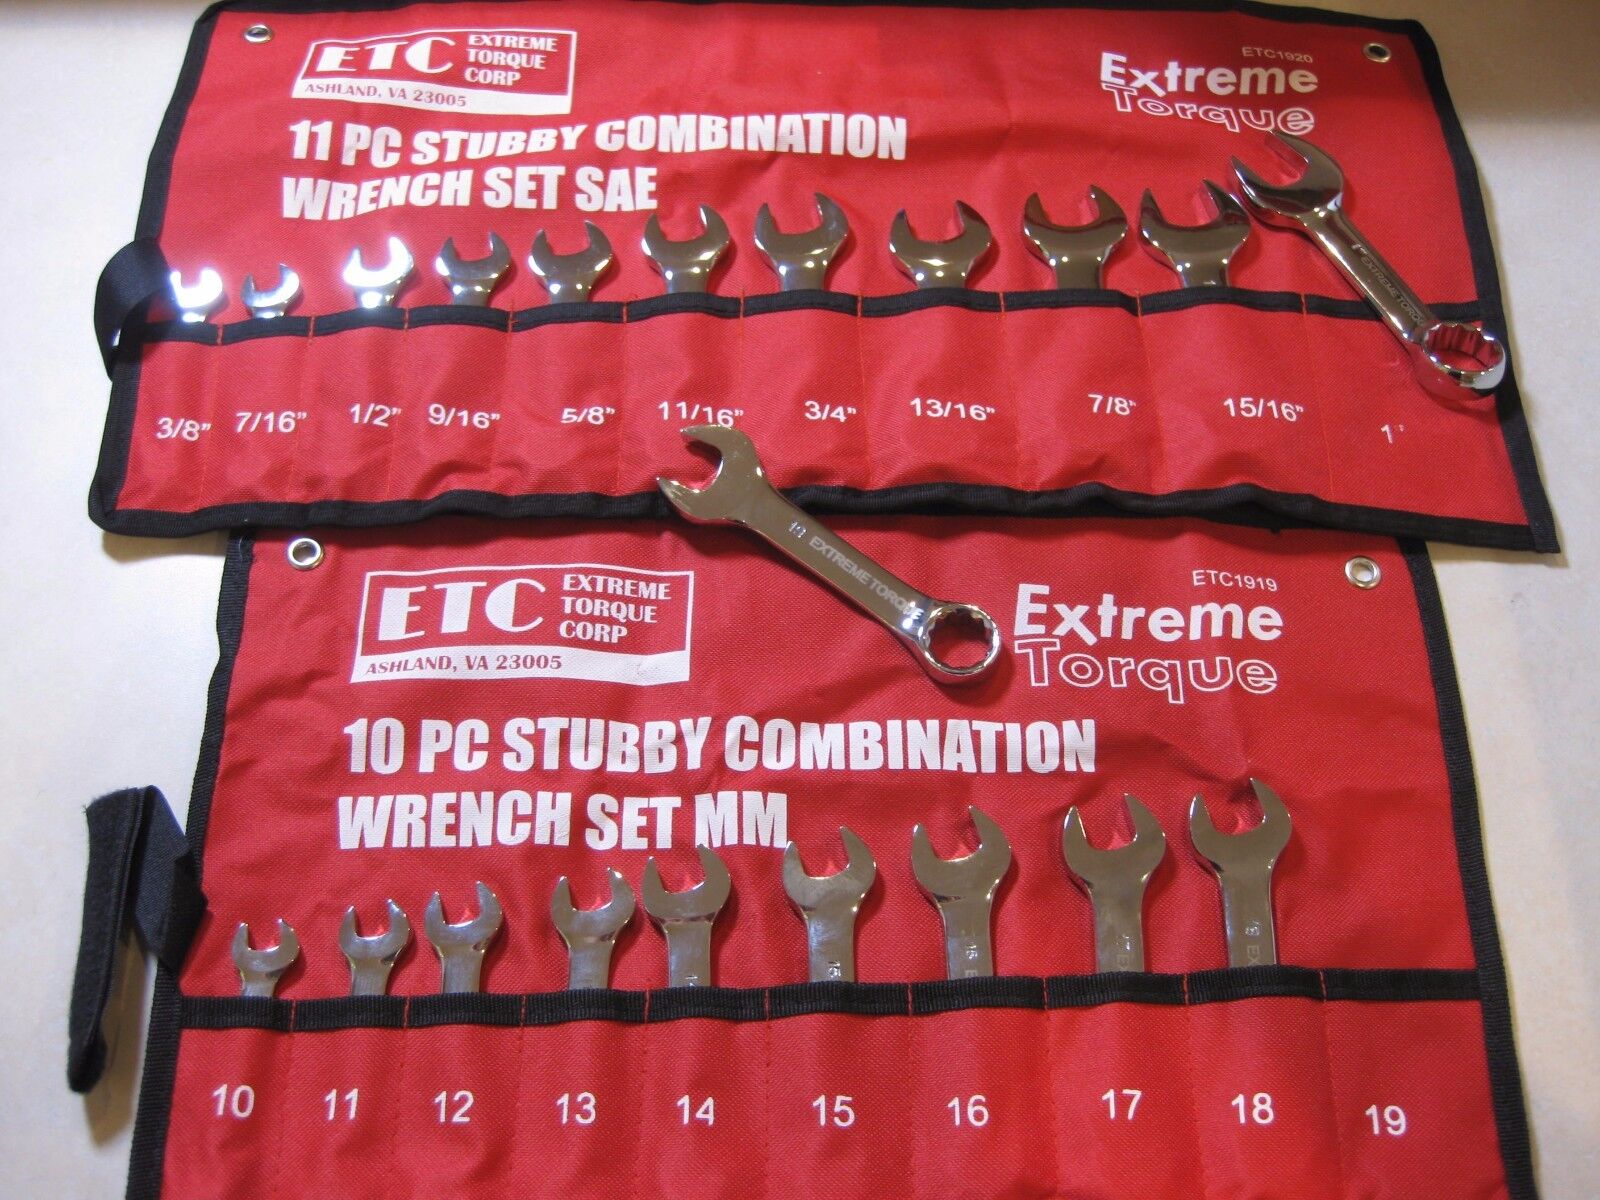 Special: 2 Stubby Short Combination Wrench Sets SAE & Metric ETC Extreme Torque